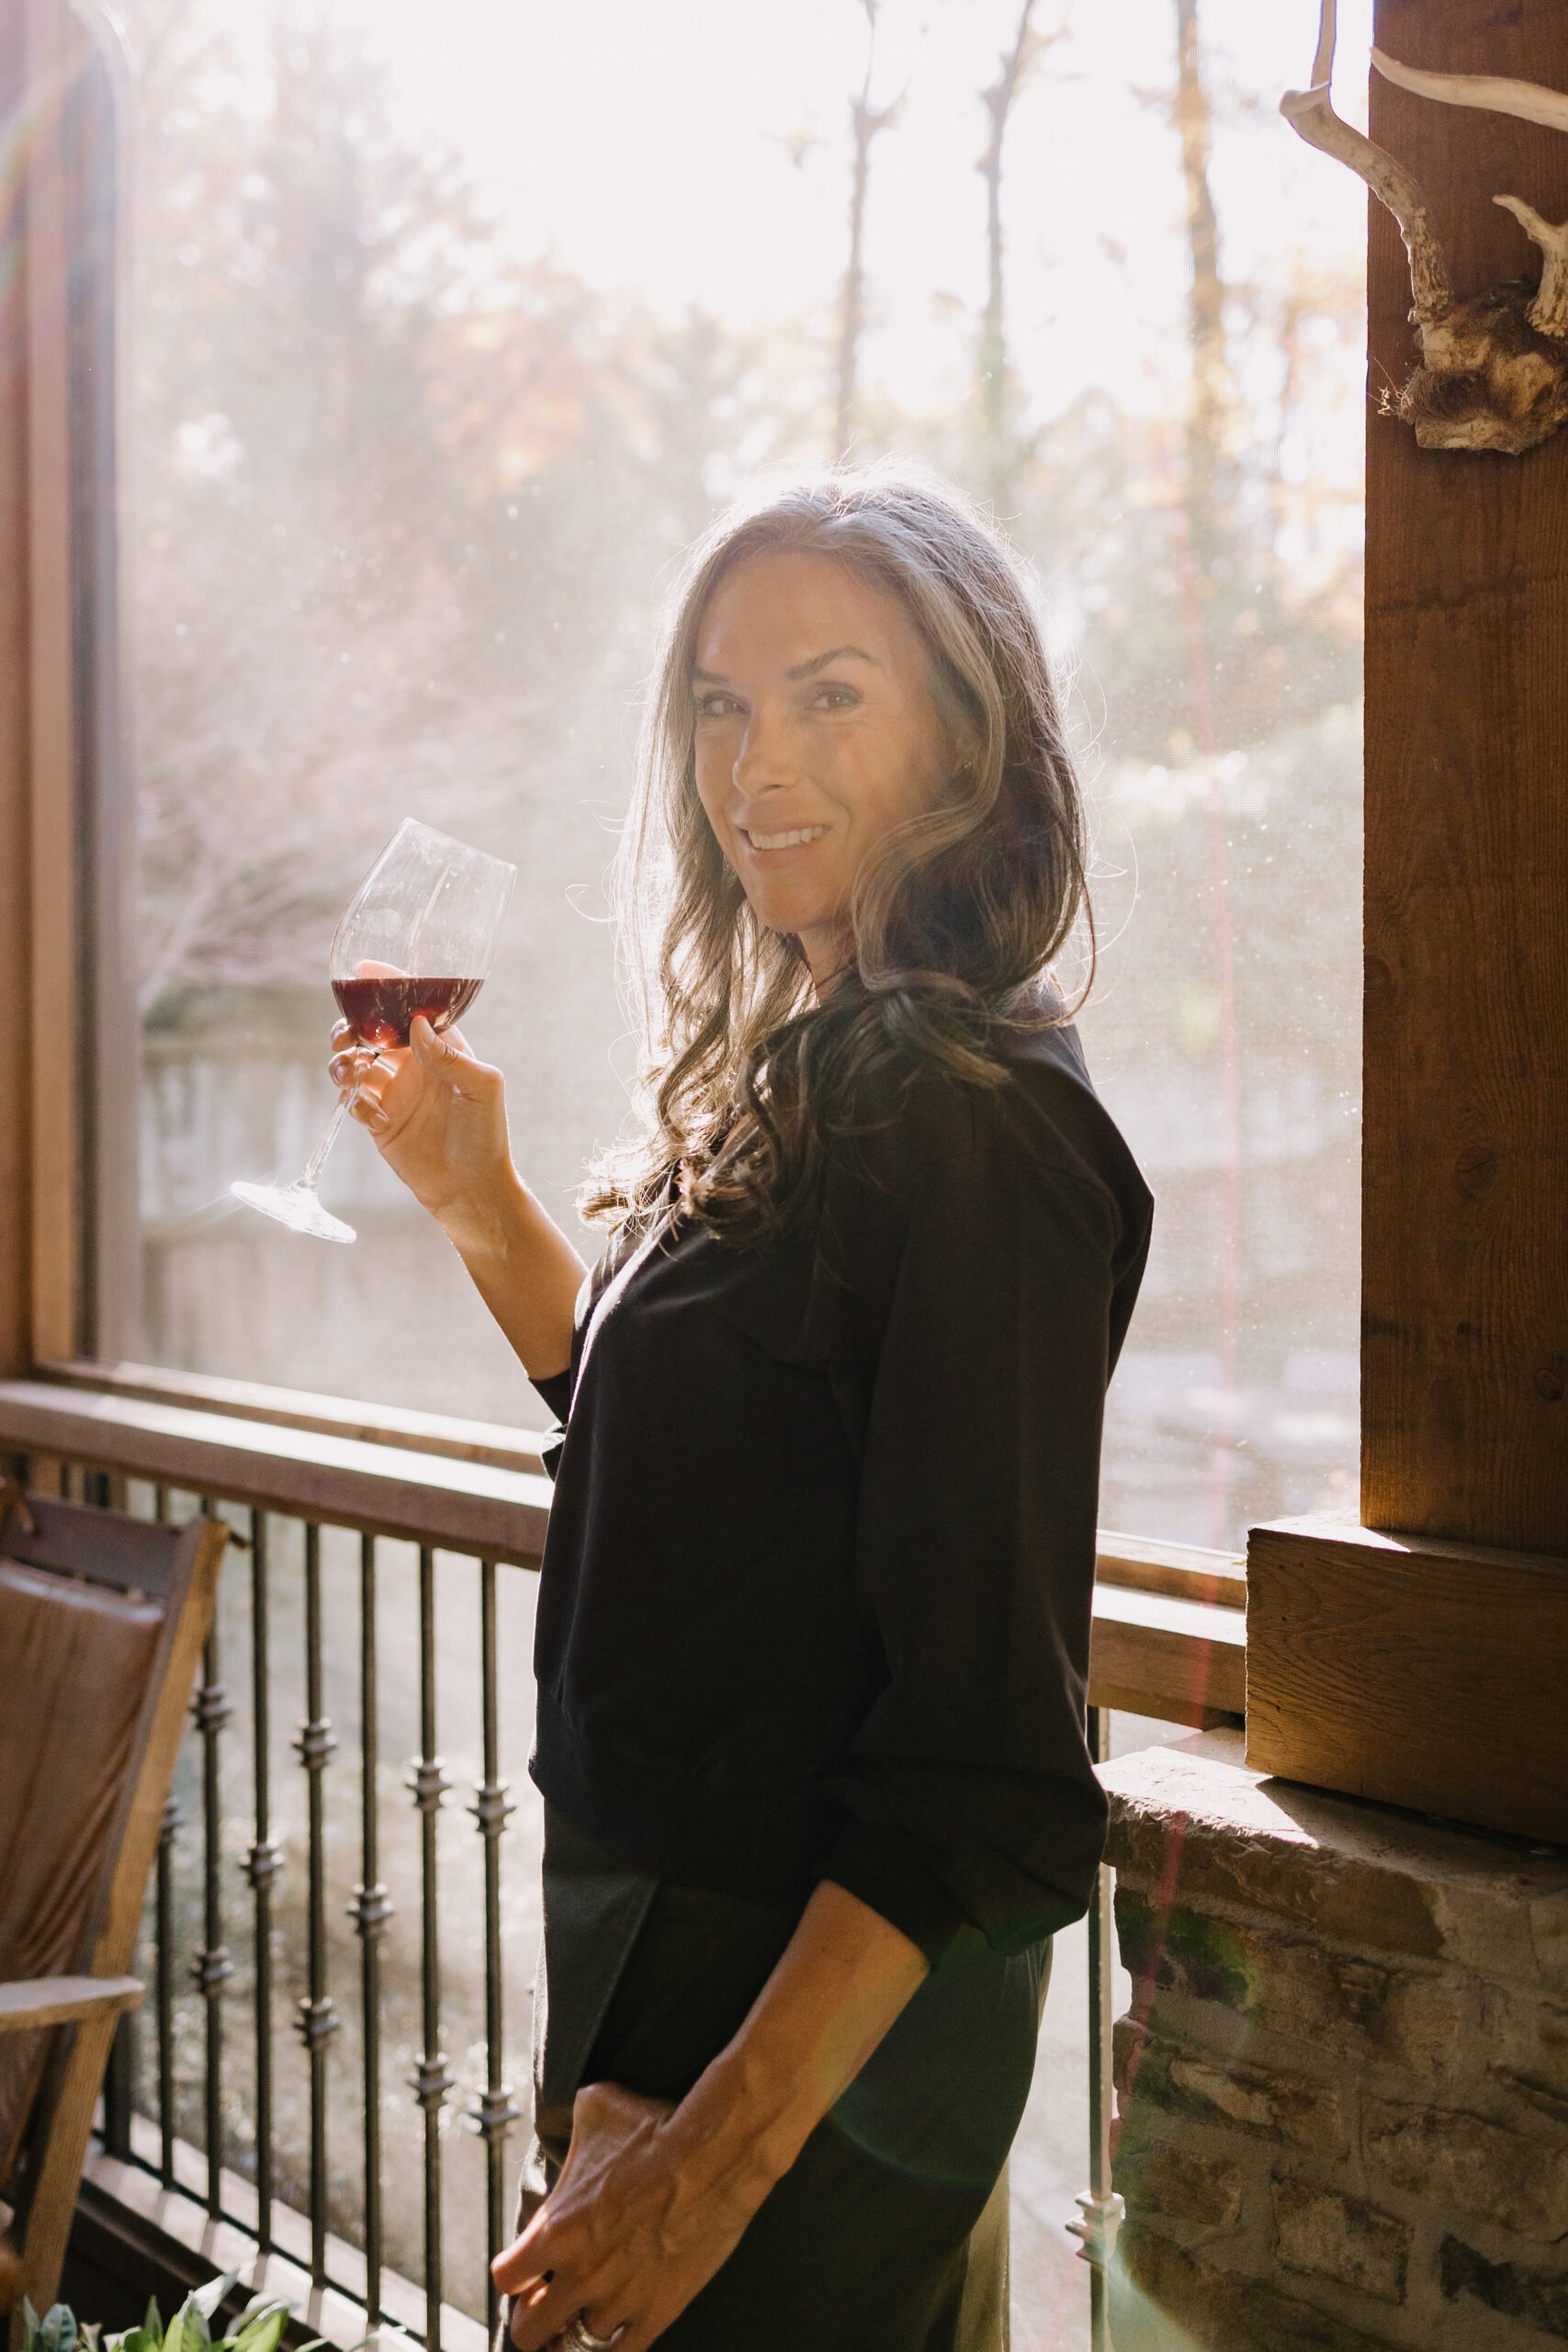 A woman holds up a glass of red wine.